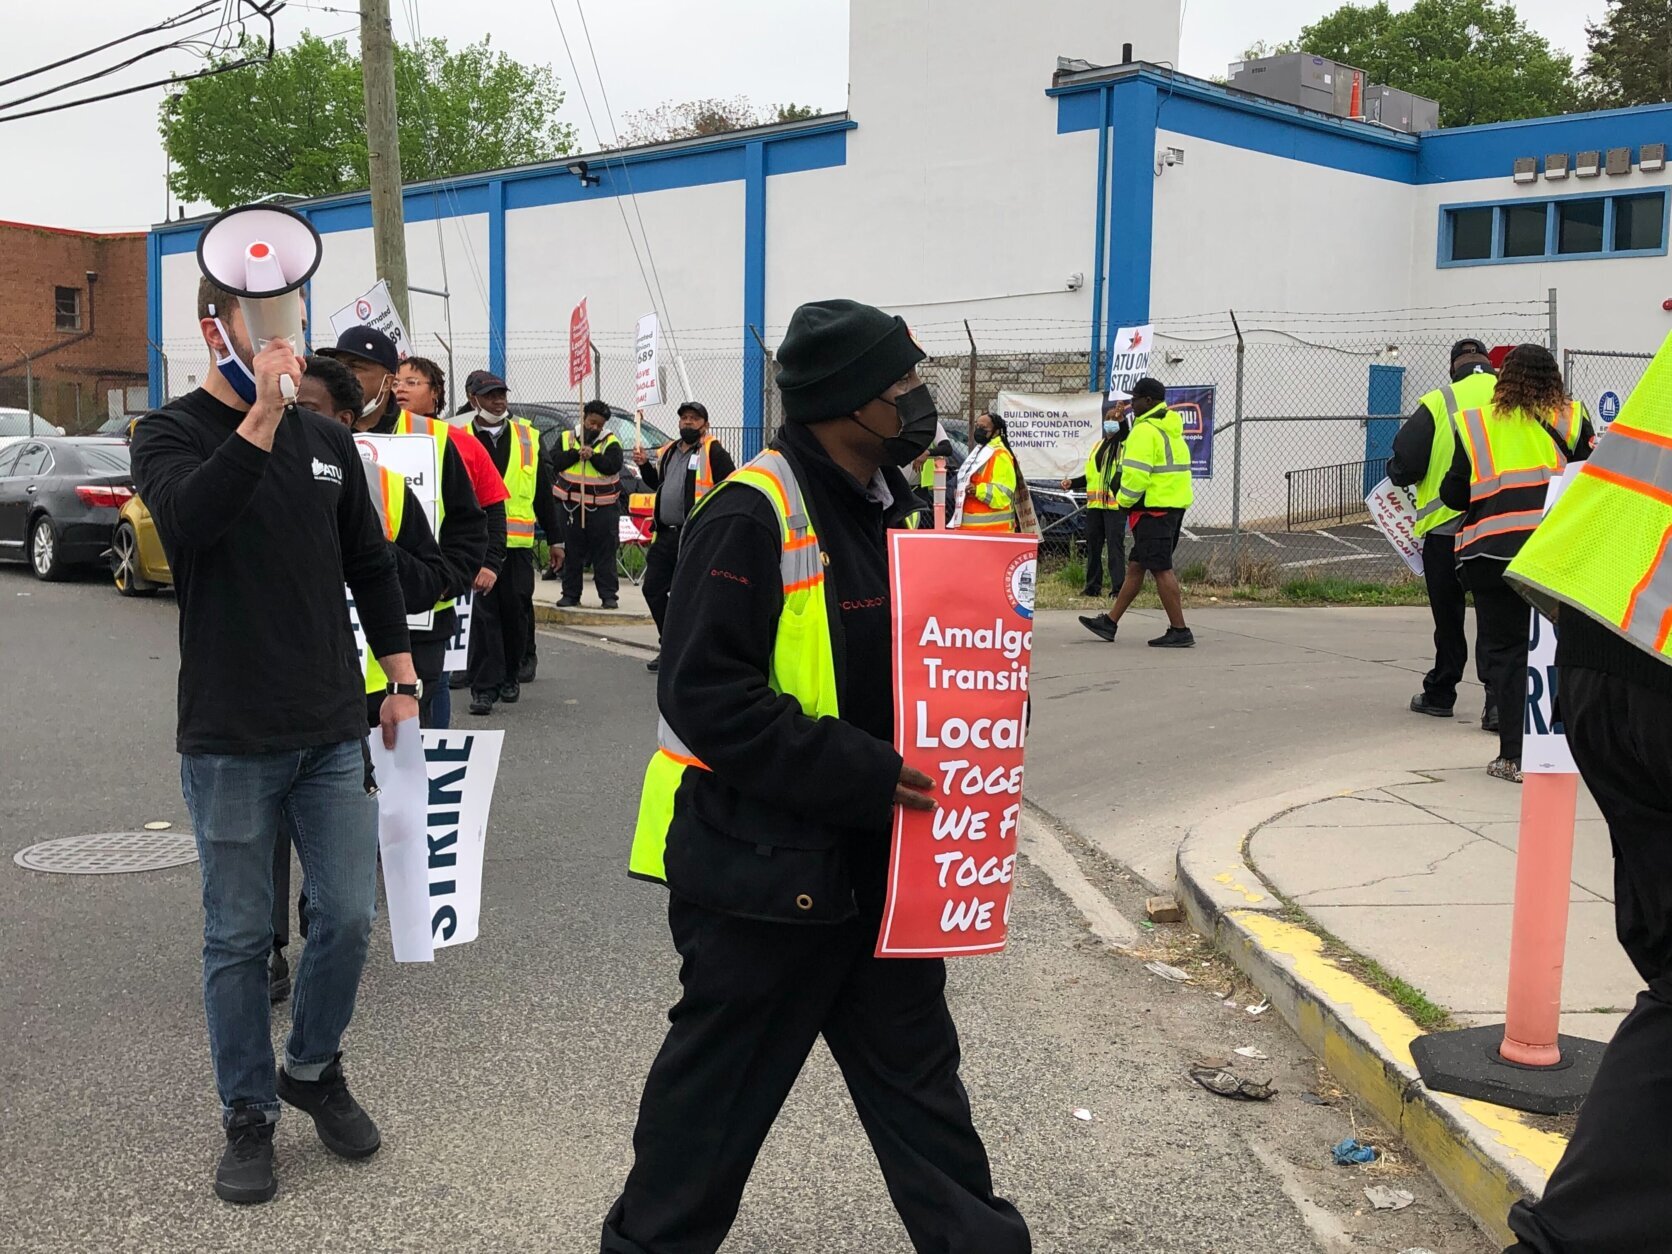 The union said that after months of negotiations, RATP Dev has been "negotiating in bad faith," threatening to substitute union members with subcontractors, eliminating the worker's federal rights under the Family & Medical Leave Act, and undermining progressive discipline.